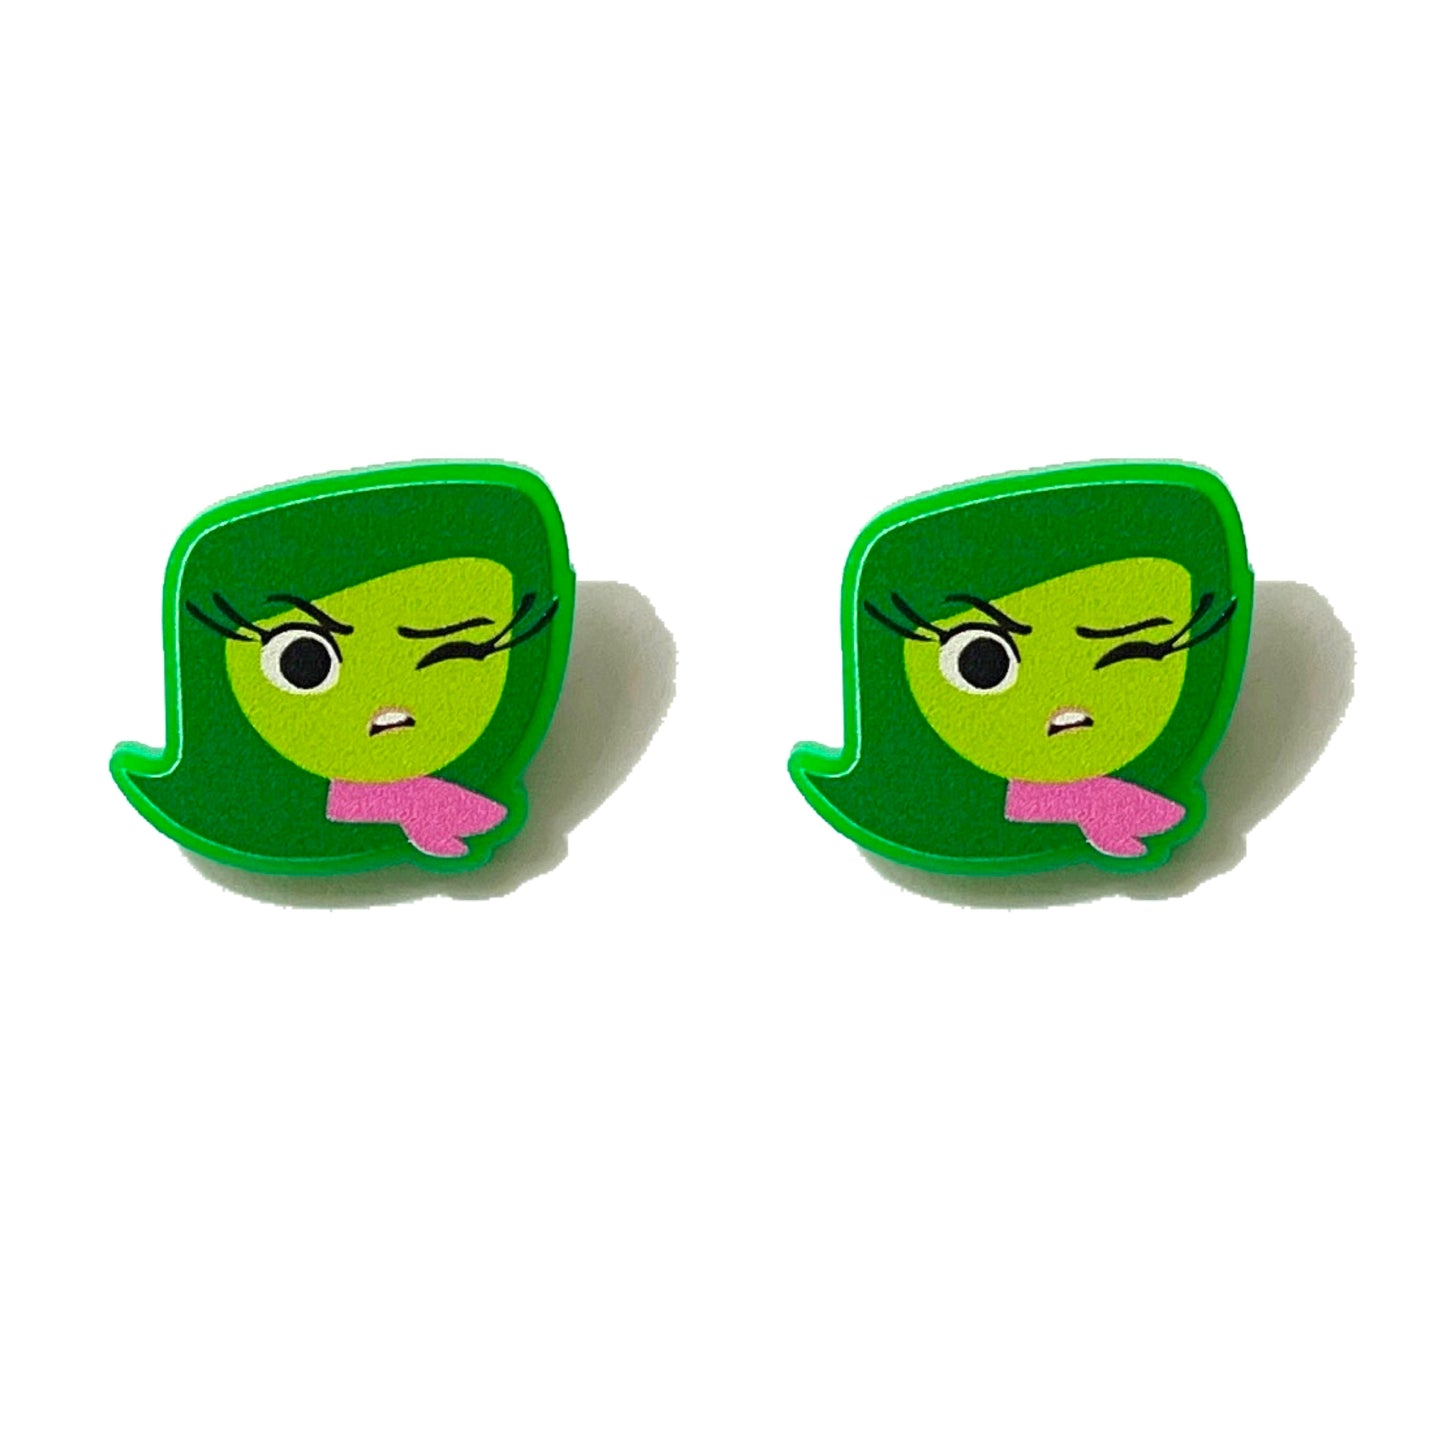 Emotions Post Earrings - Mix n Match or Single Pair